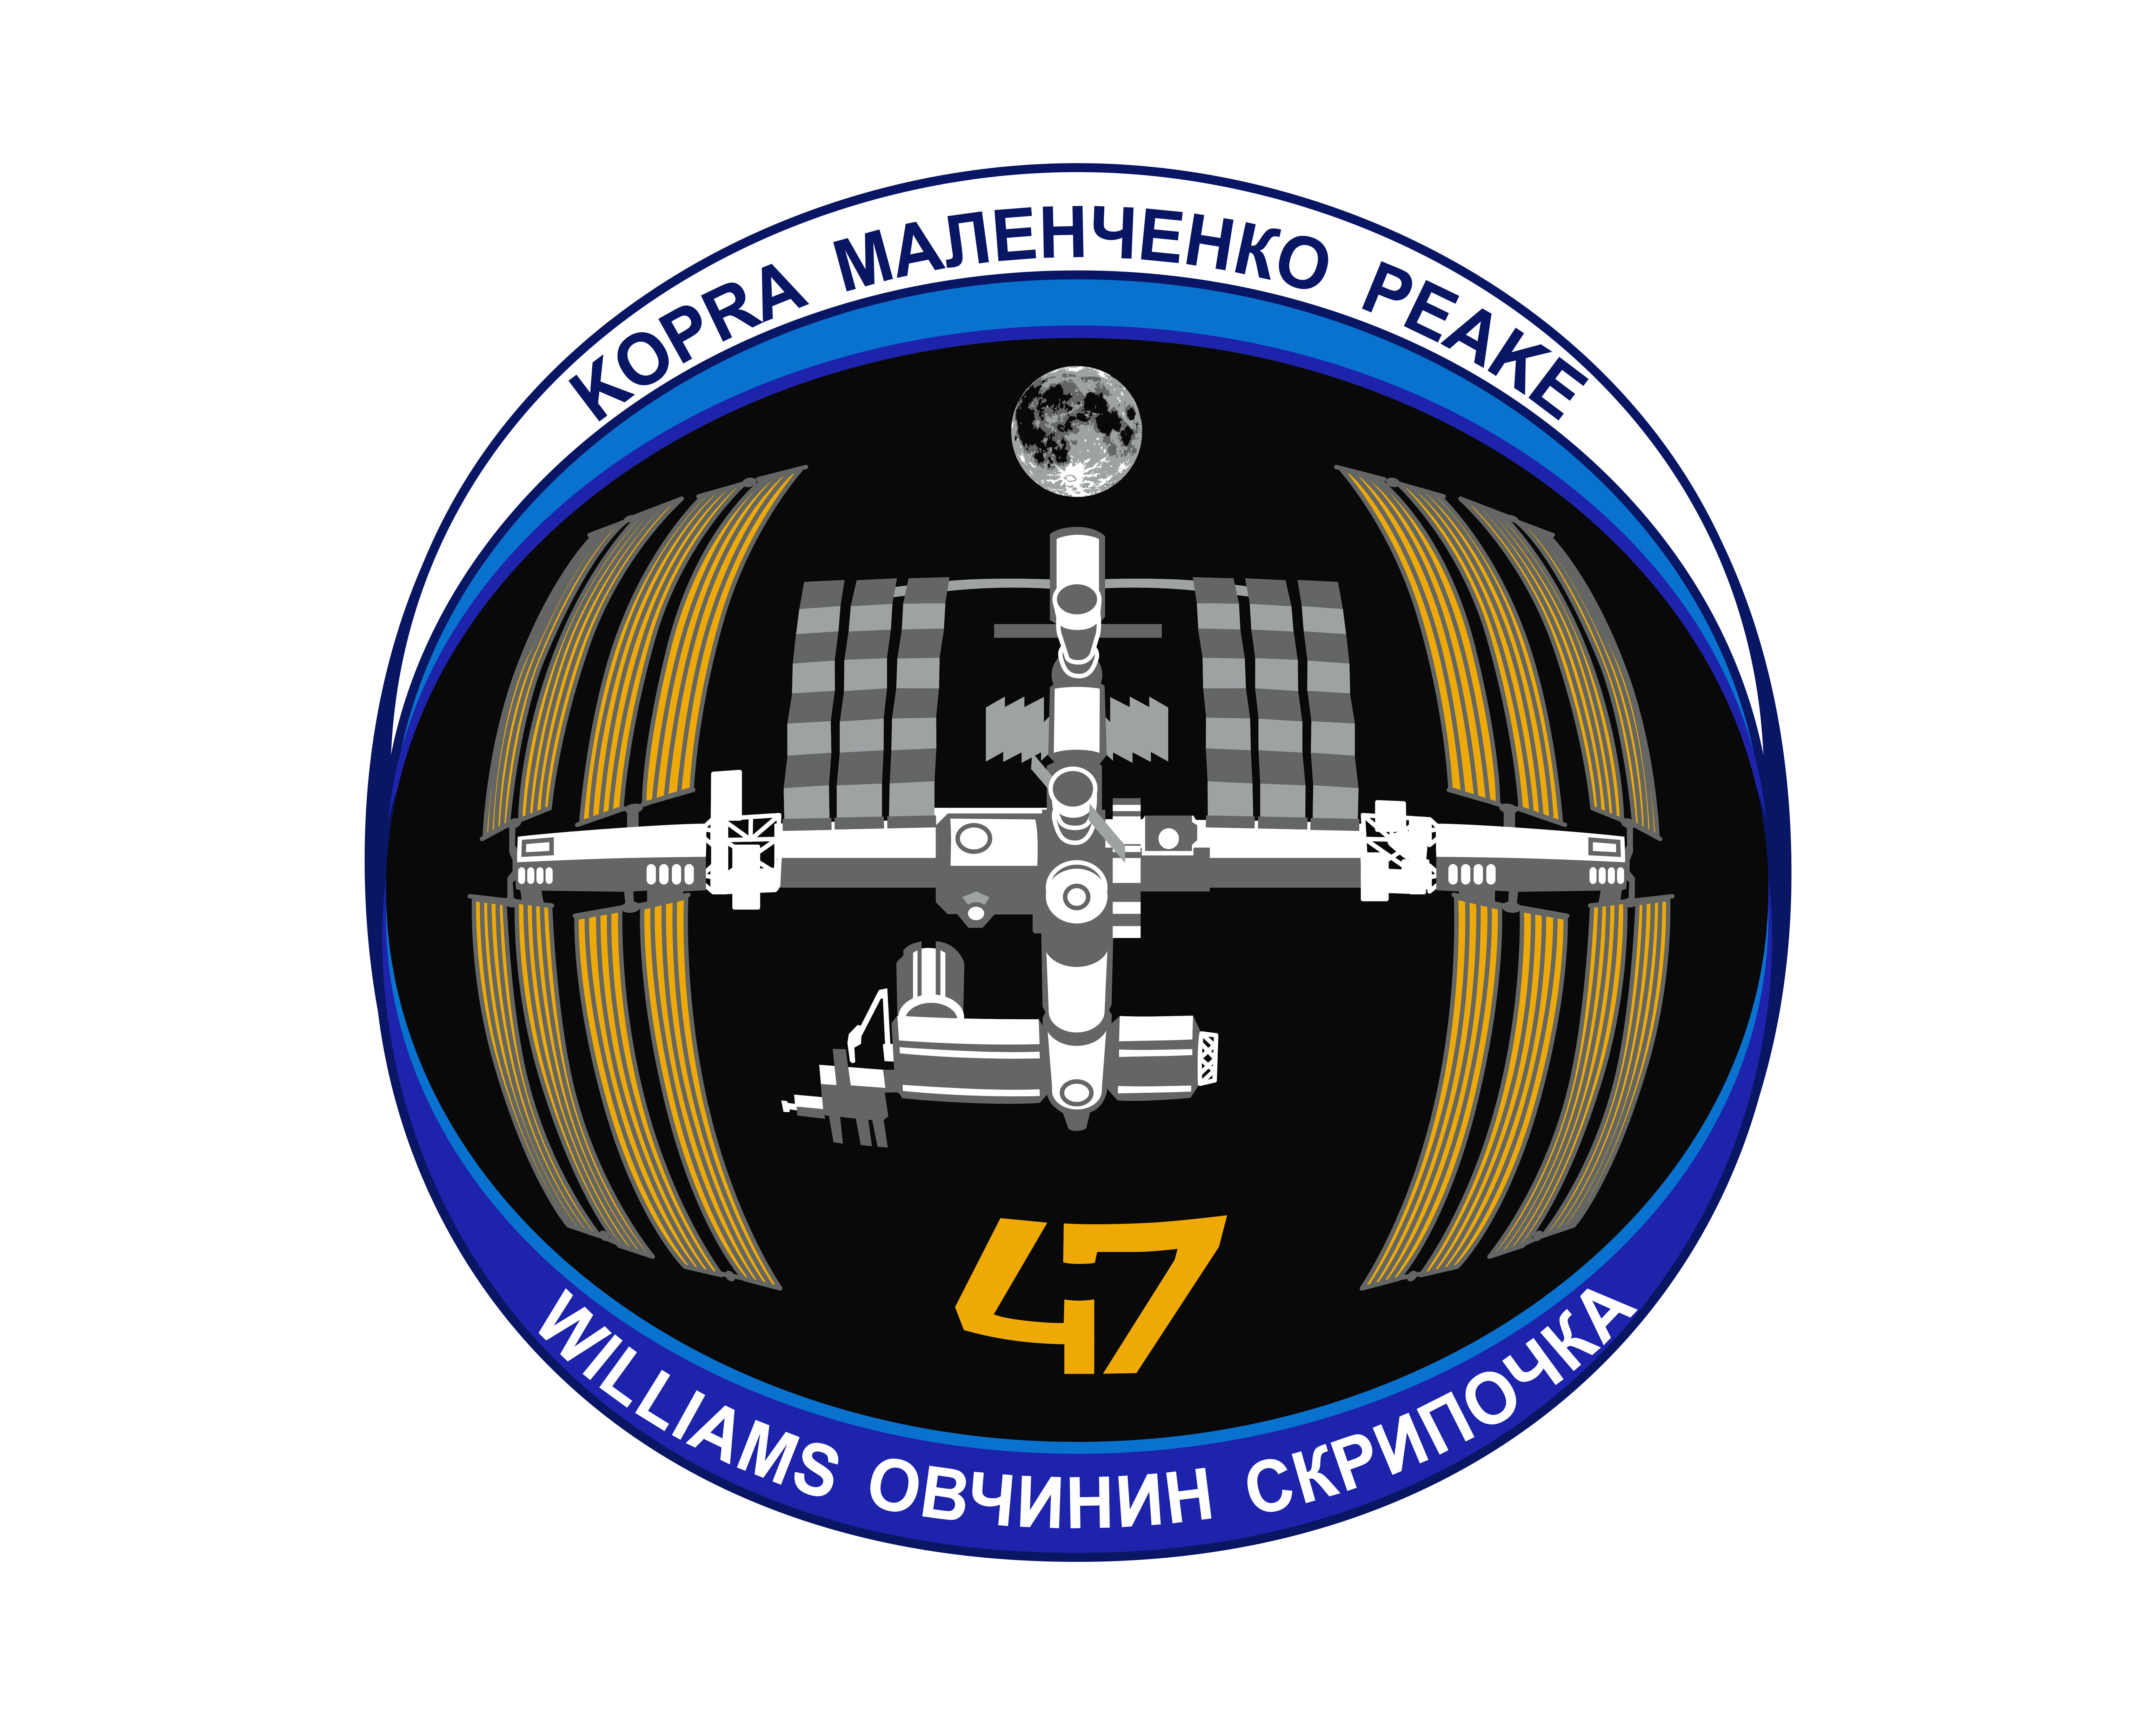 Expedition 47 Official Crew Insignia